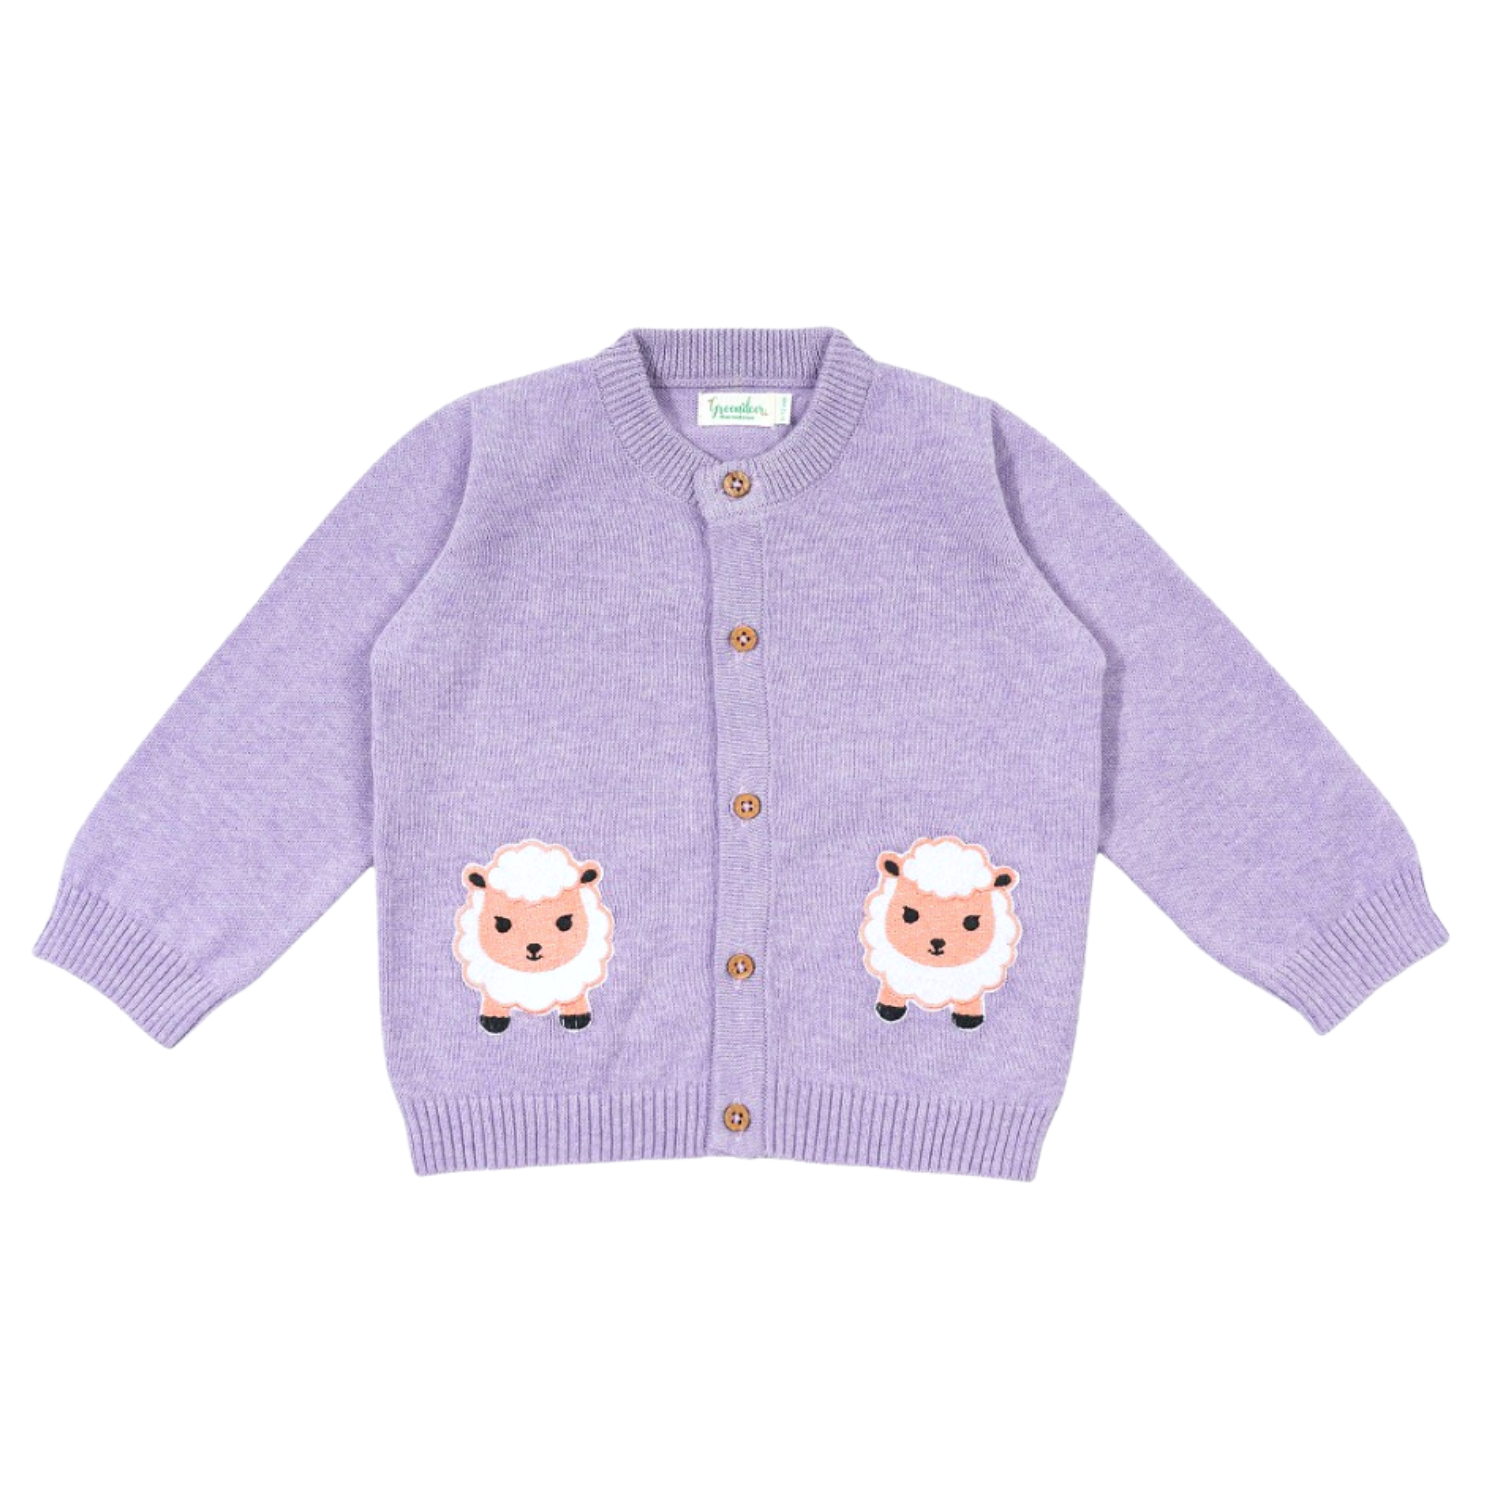 Lavender Sheep love Sweater and Lower Combo Set of 3